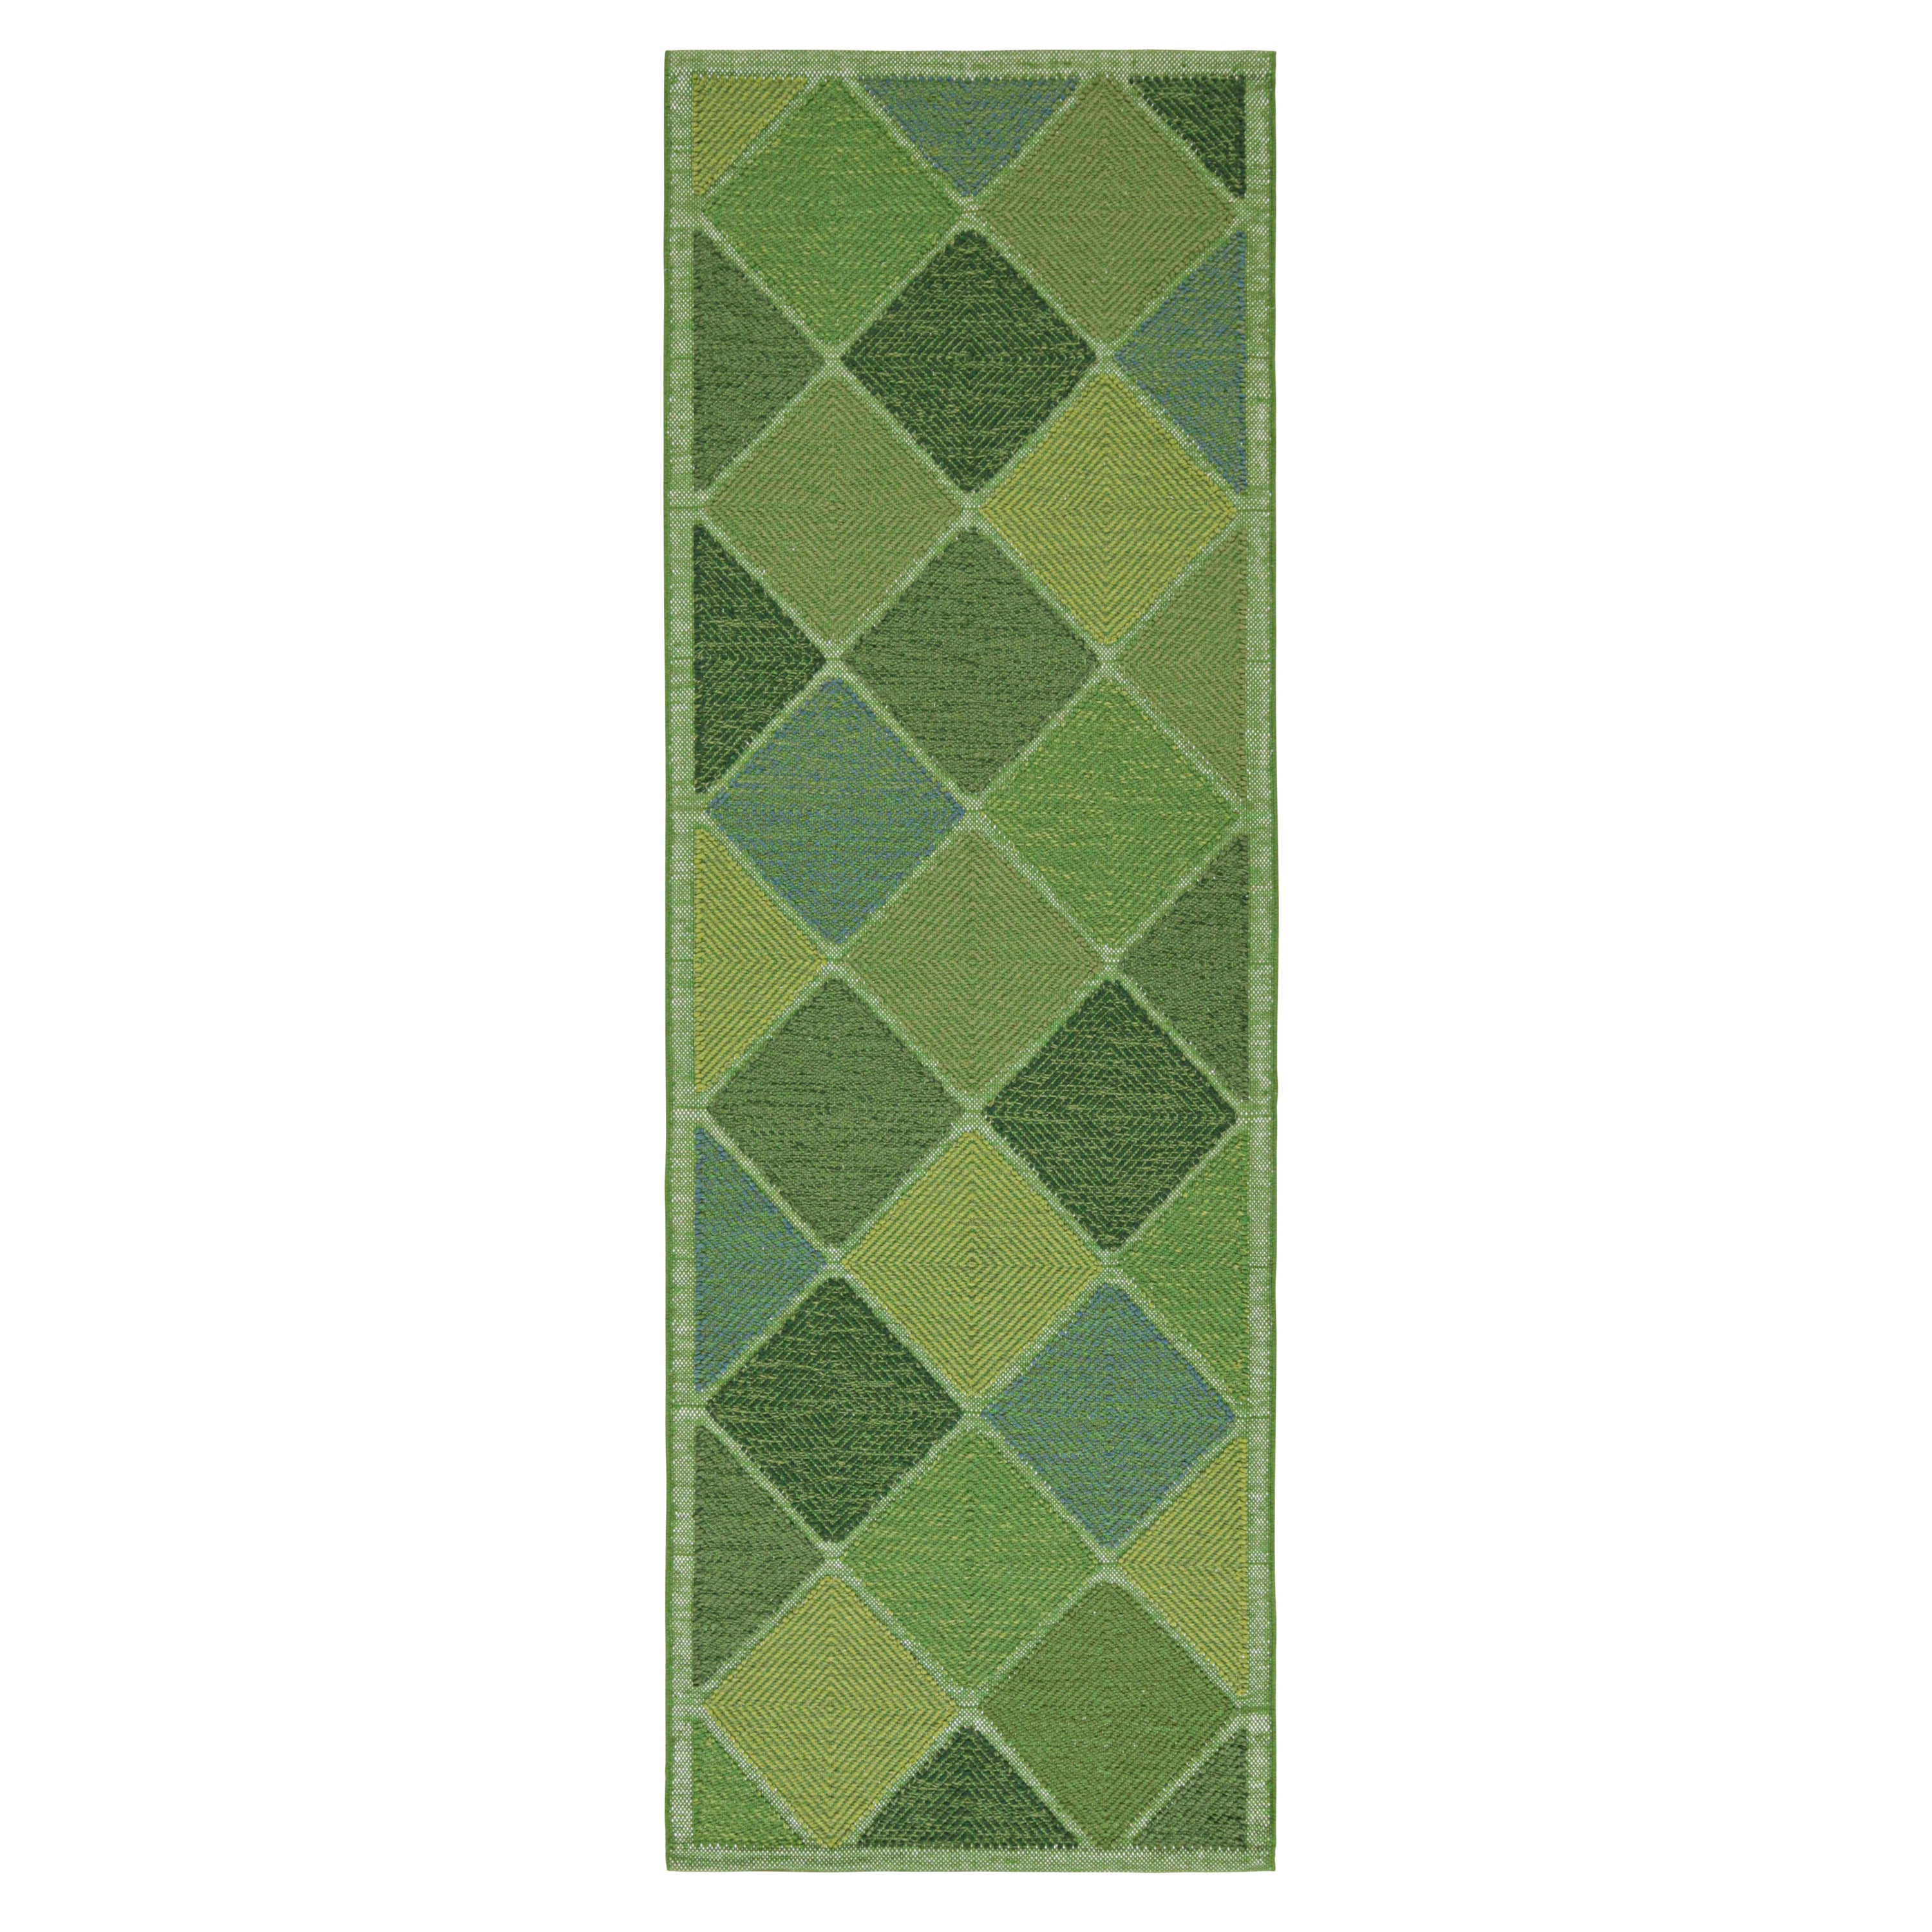 Rug & Kilim’s Scandinavian Style Kilim in Green High-and-Low Diamond Patterns For Sale